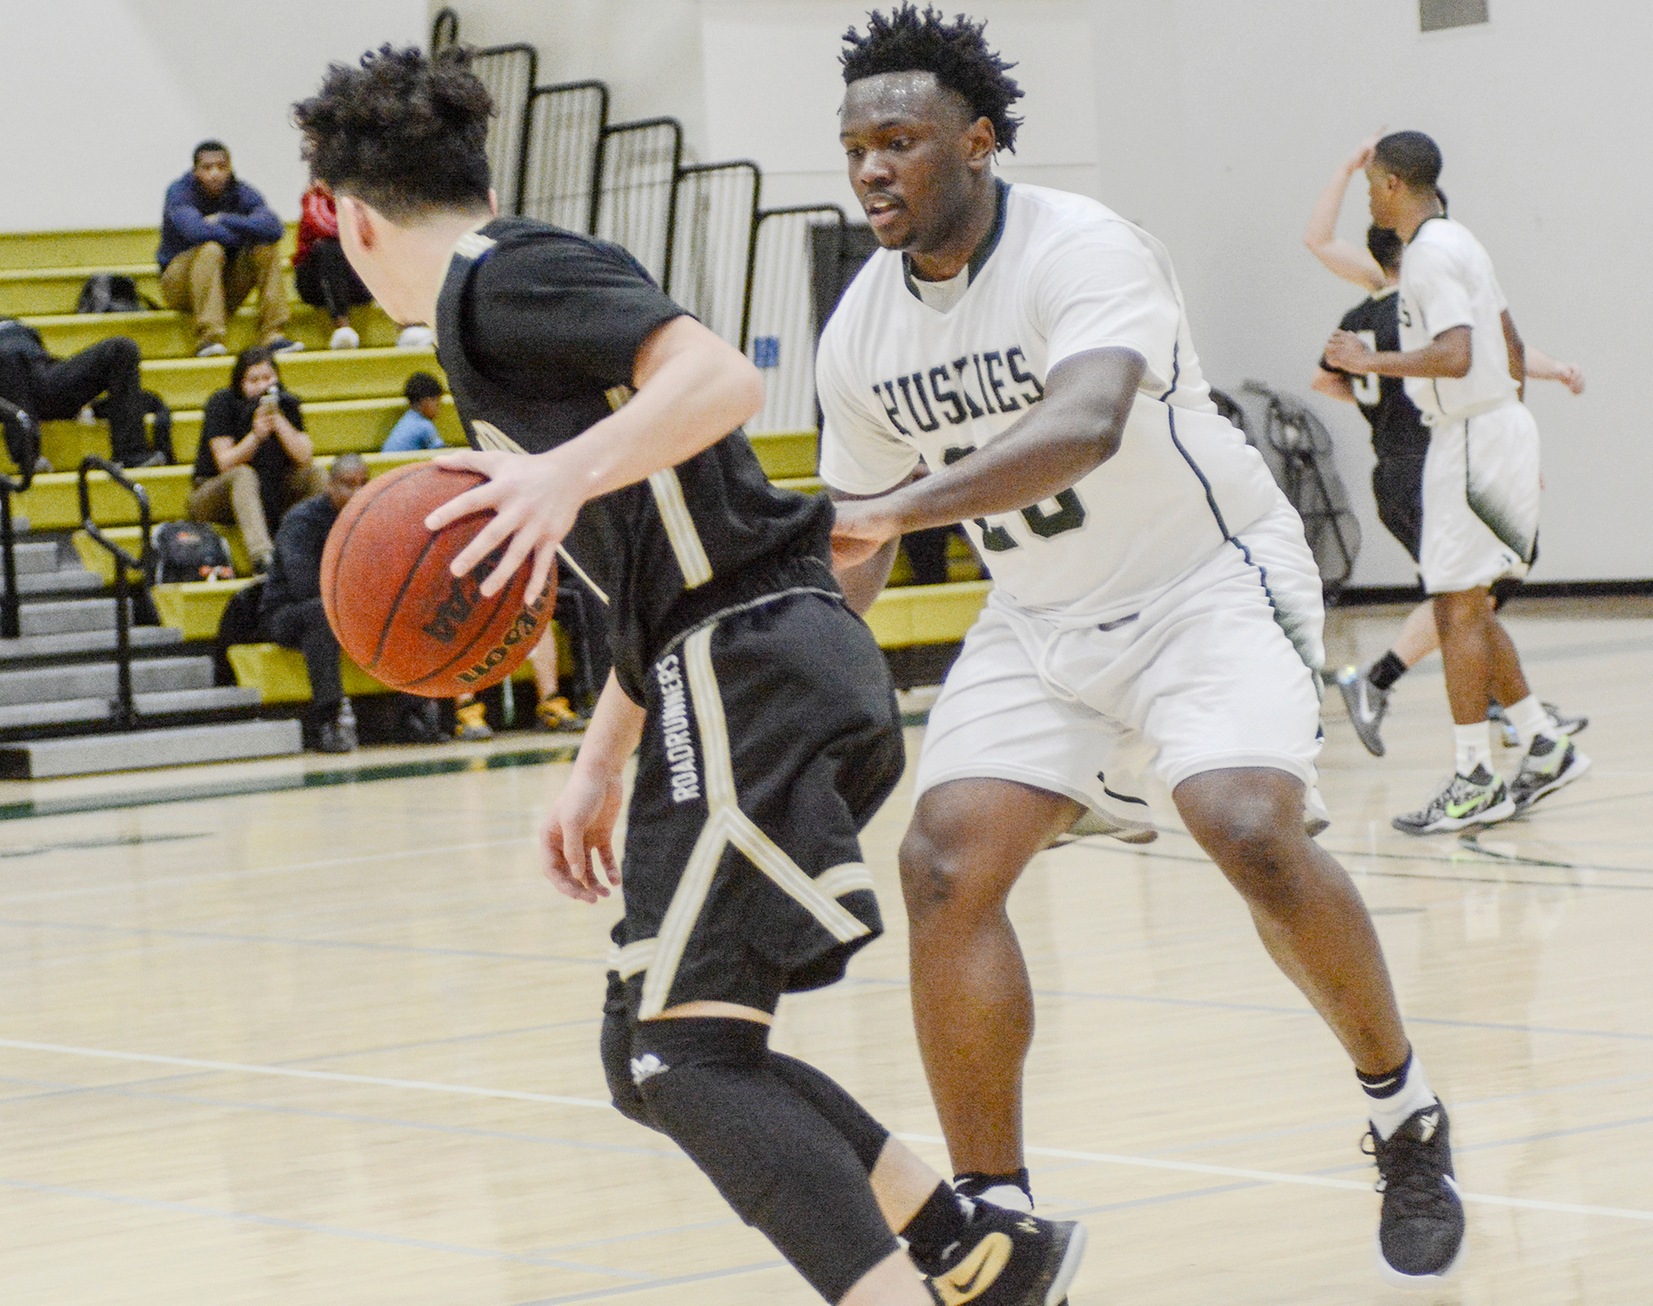 East Los Angeles sophomore guard Sequan Walker works on defense and scored in double digits in a 98-57 win vs. Rio Hondo College on Feb. 8. (Photo by Tadzio Garcia)